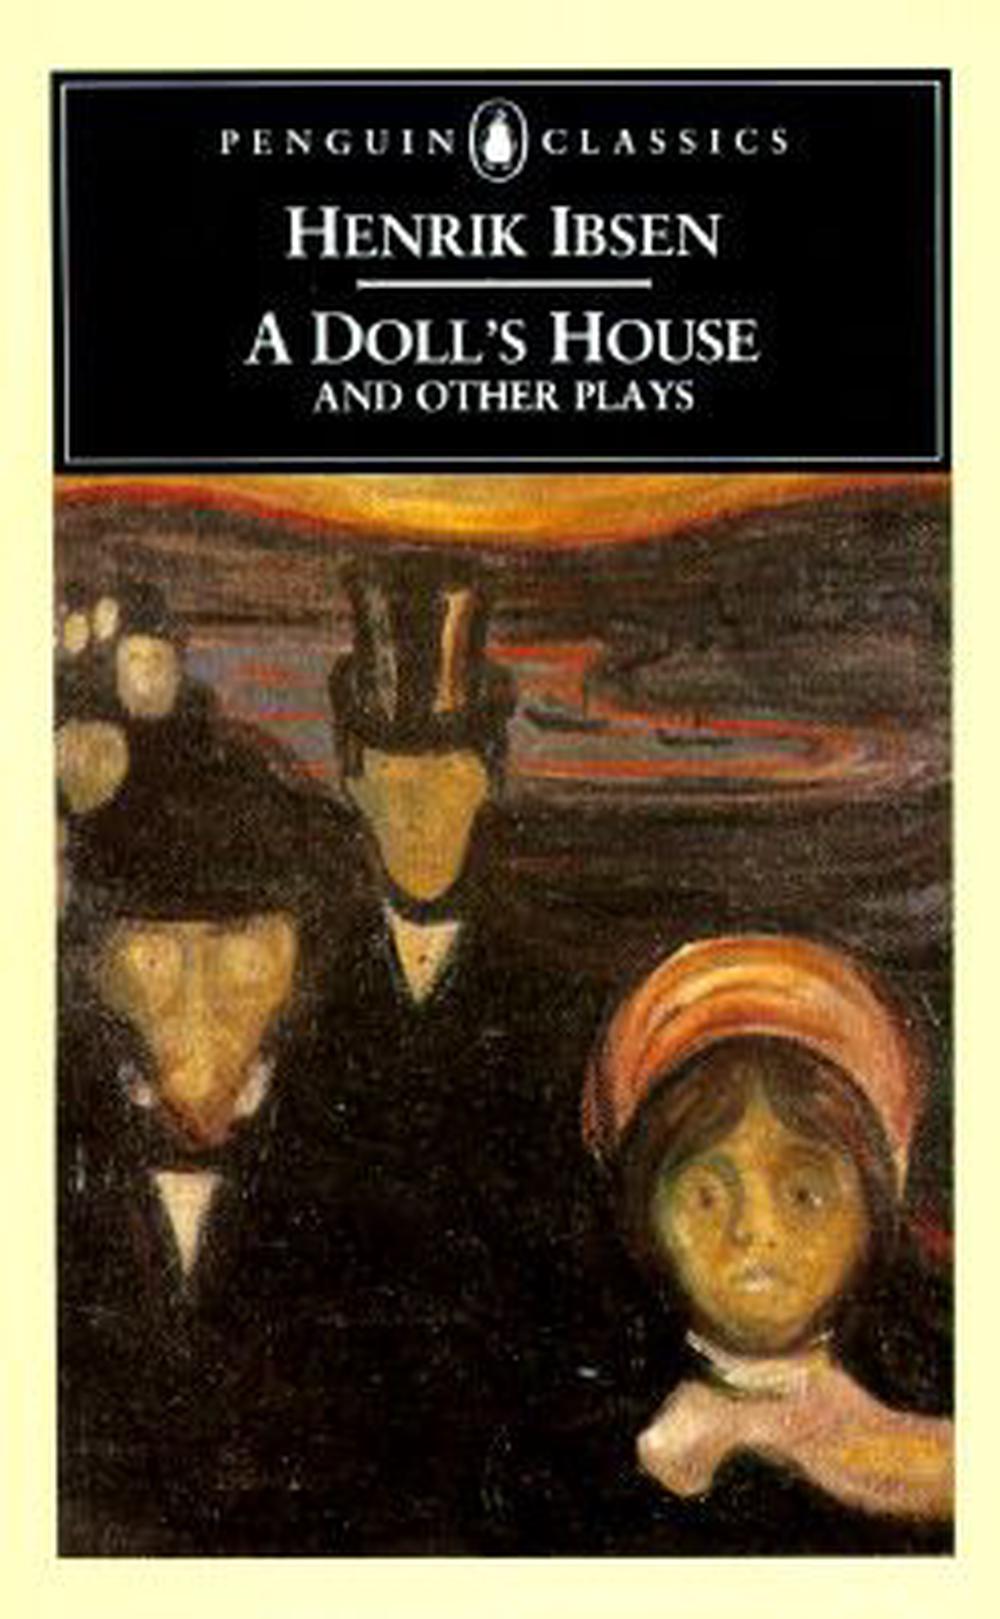 a book review of a doll's house